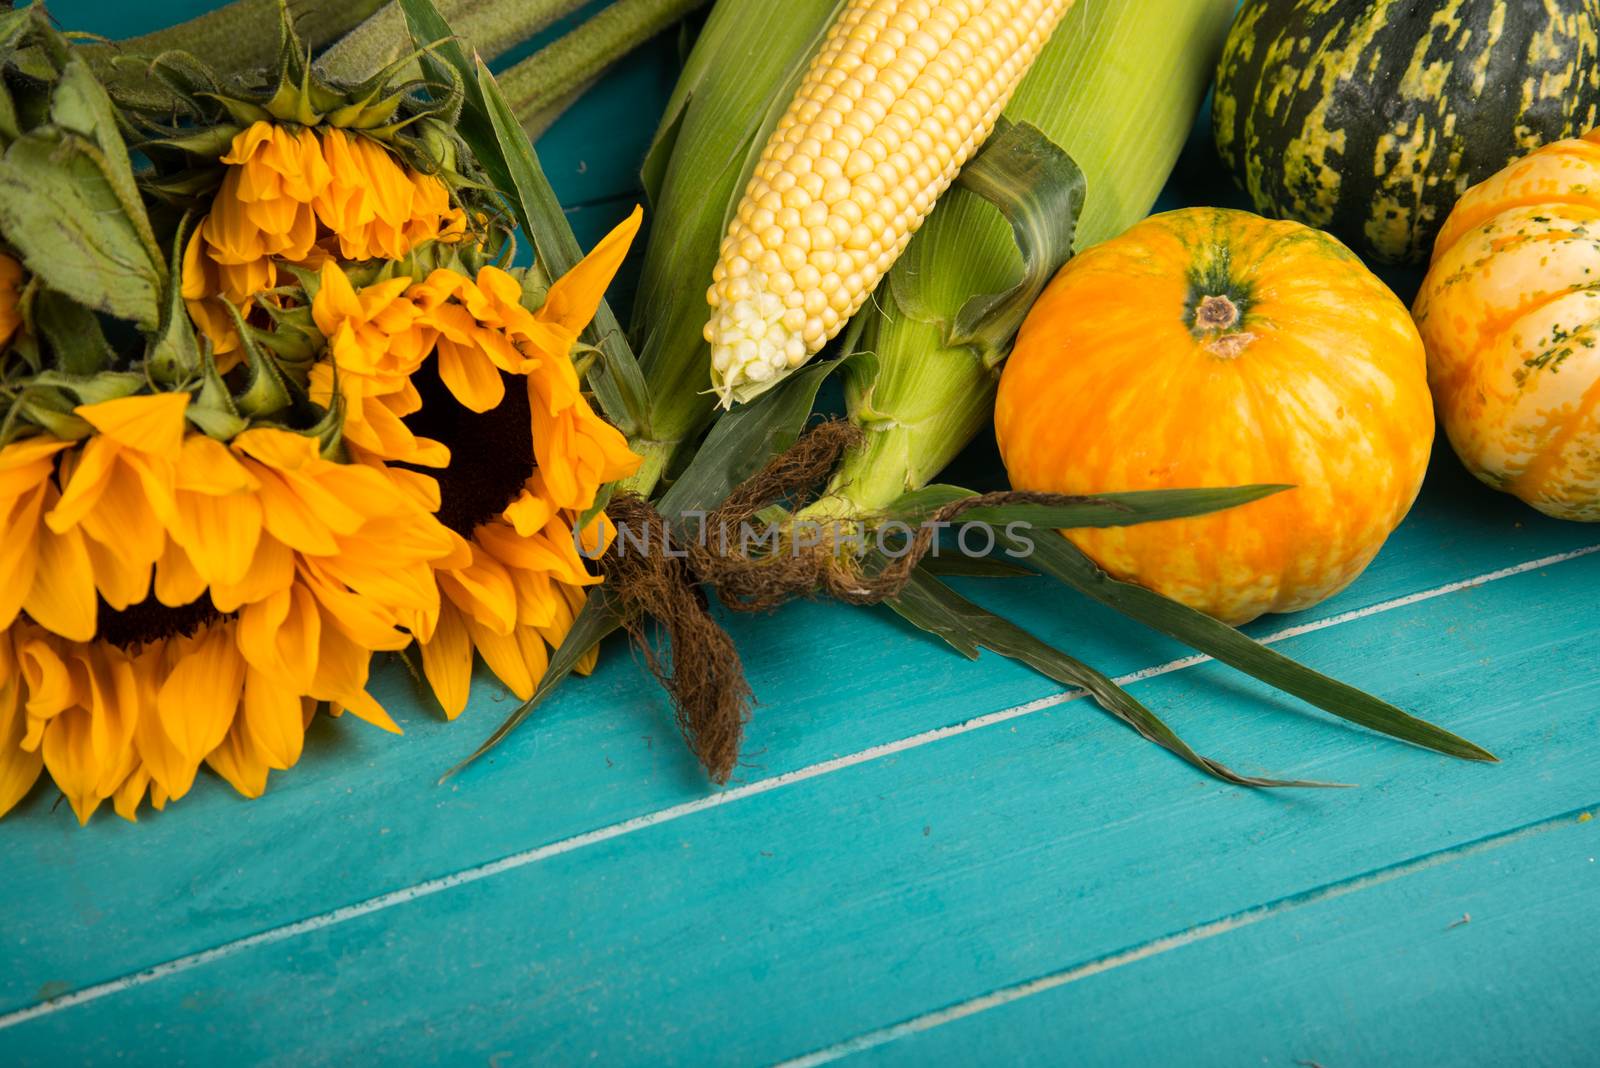 Farm fresh organic vegetables on rustic wooden blue table background